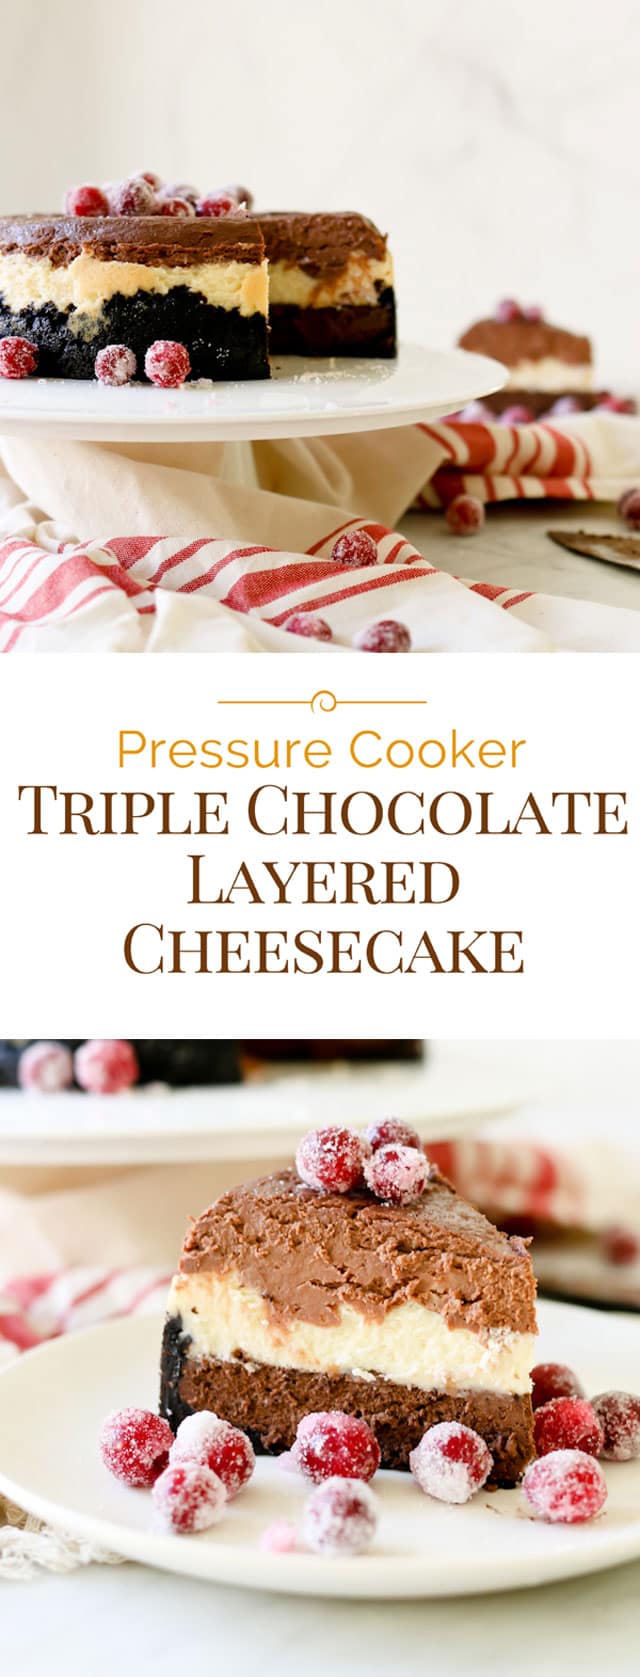 photo collage of Pressure Cooker Triple Chocolate Layered Cheesecake